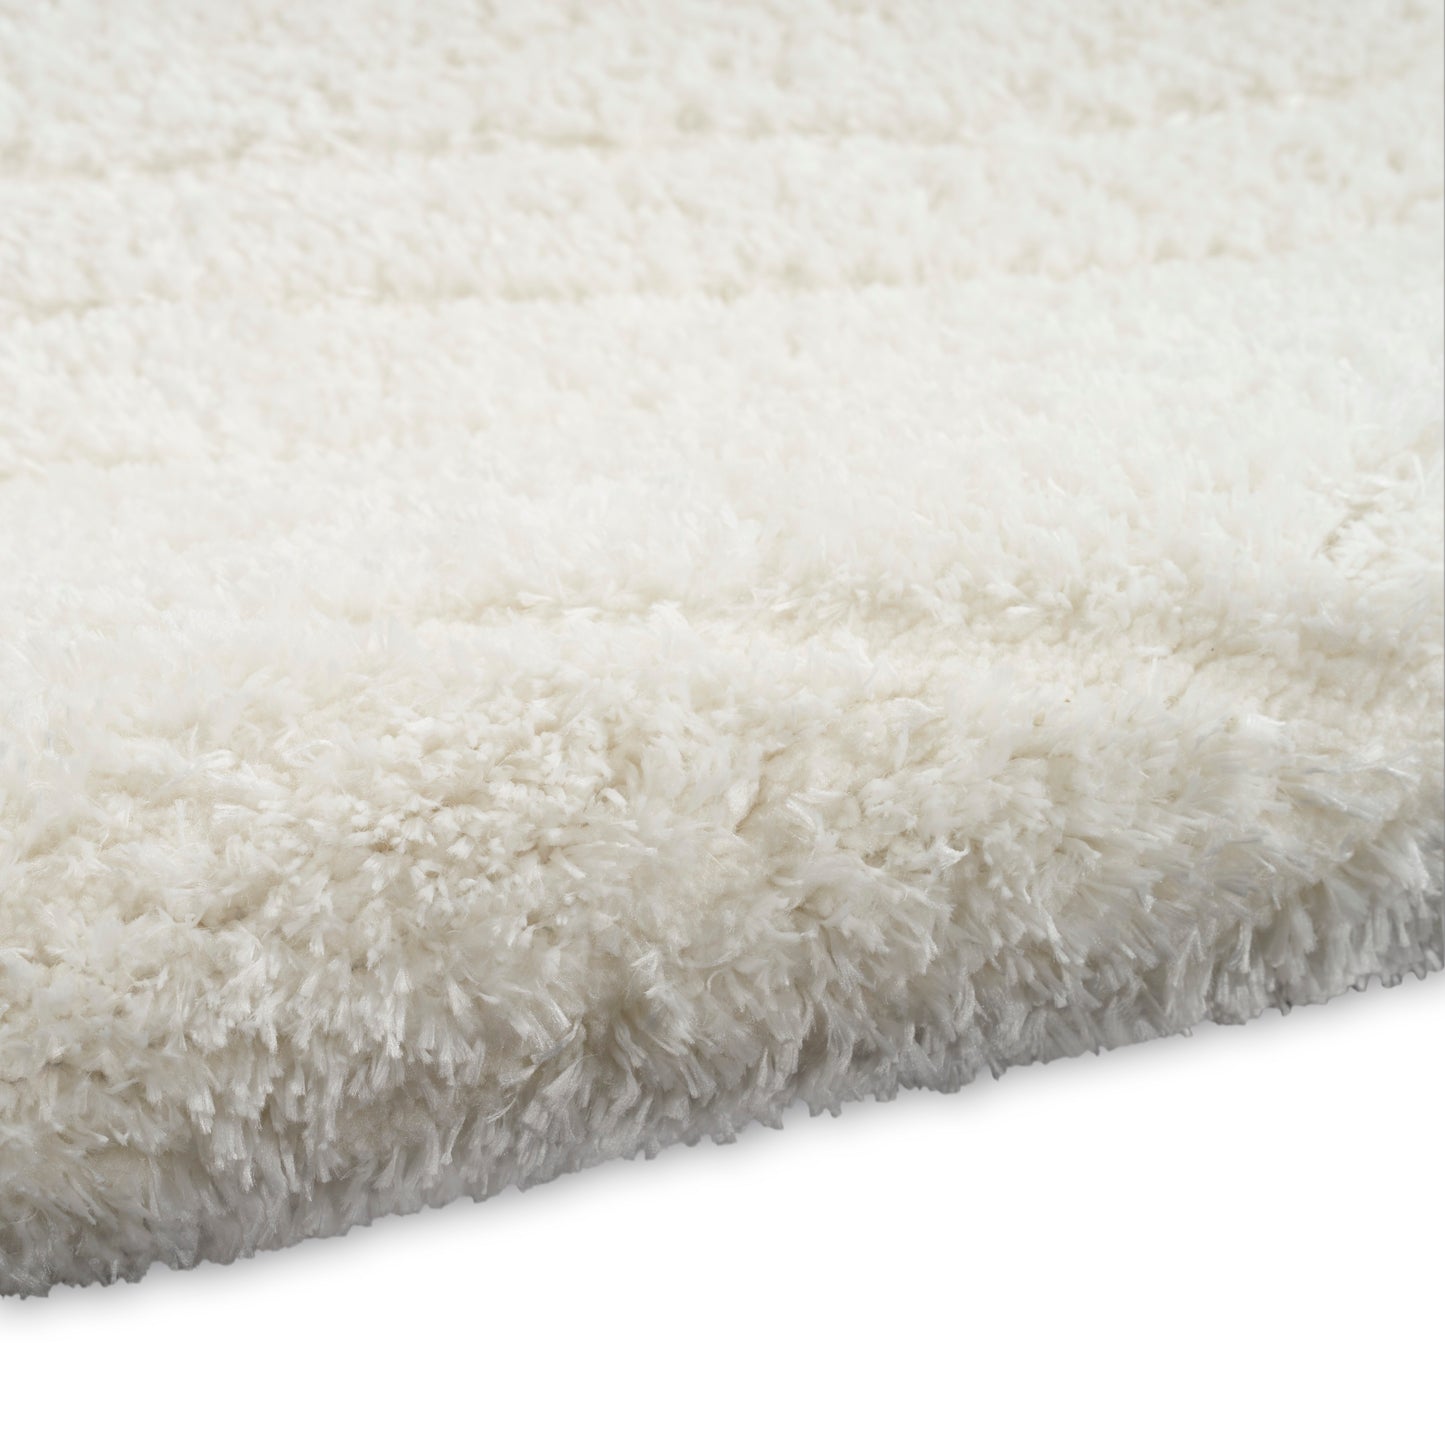 Calvin Klein Surfaces SFC01 Ivory  Contemporary Machinemade Rug